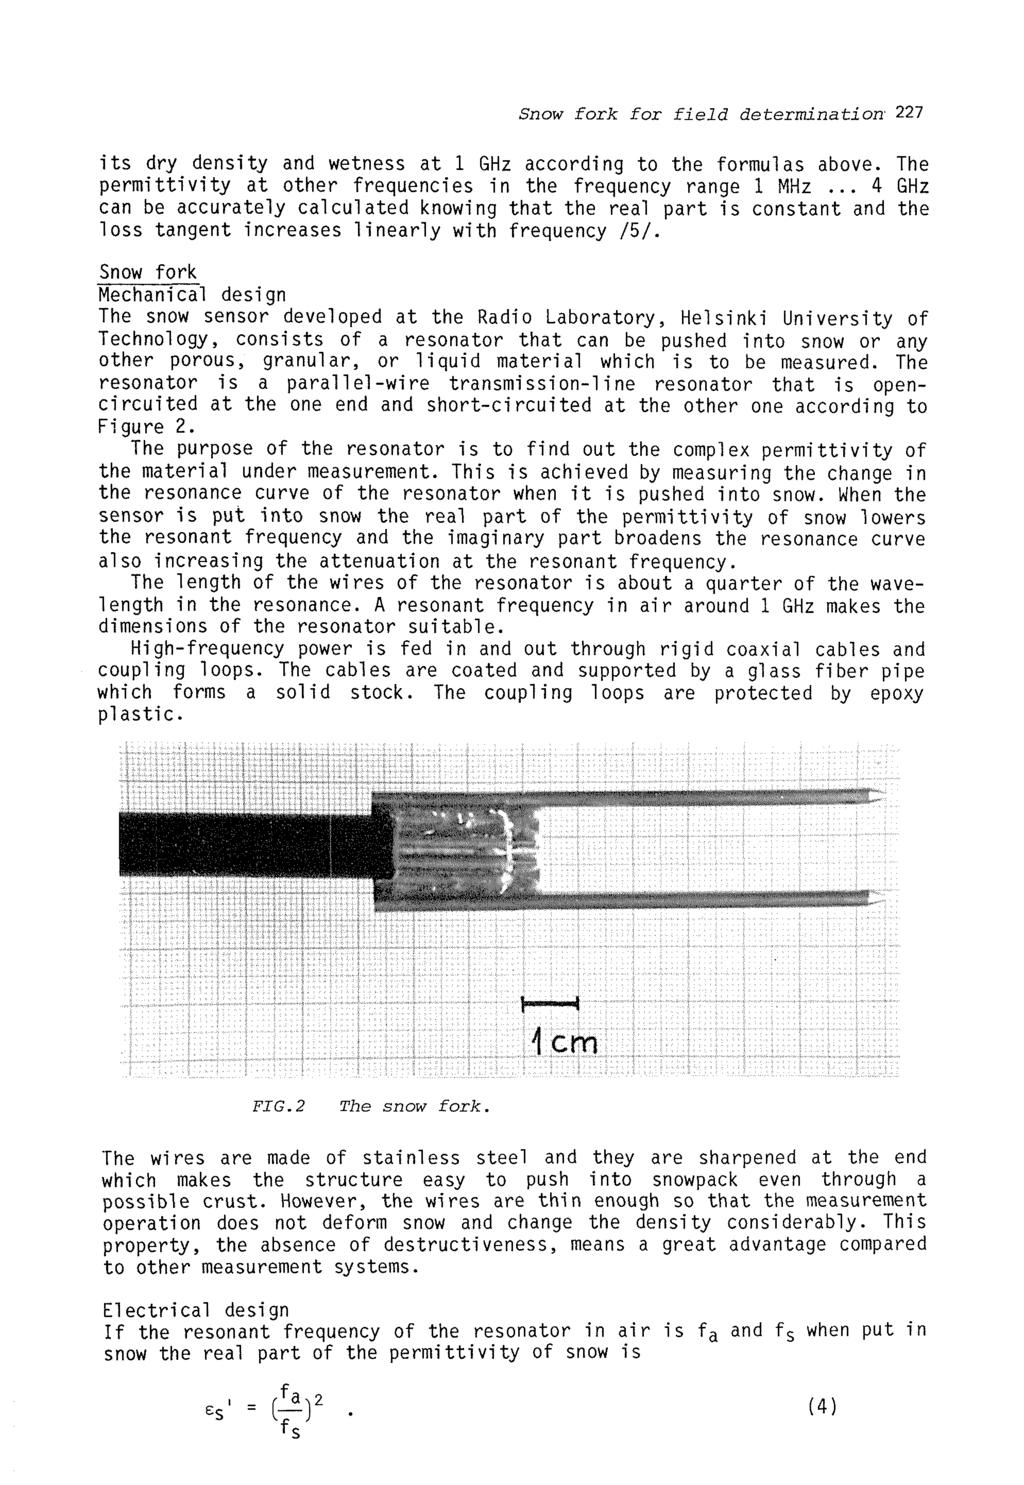 Snow fork for field determination- 227 its dry density and wetness at 1 GHz according to the formulas above. The permittivity at other frequencies in the frequency range 1 MHz.